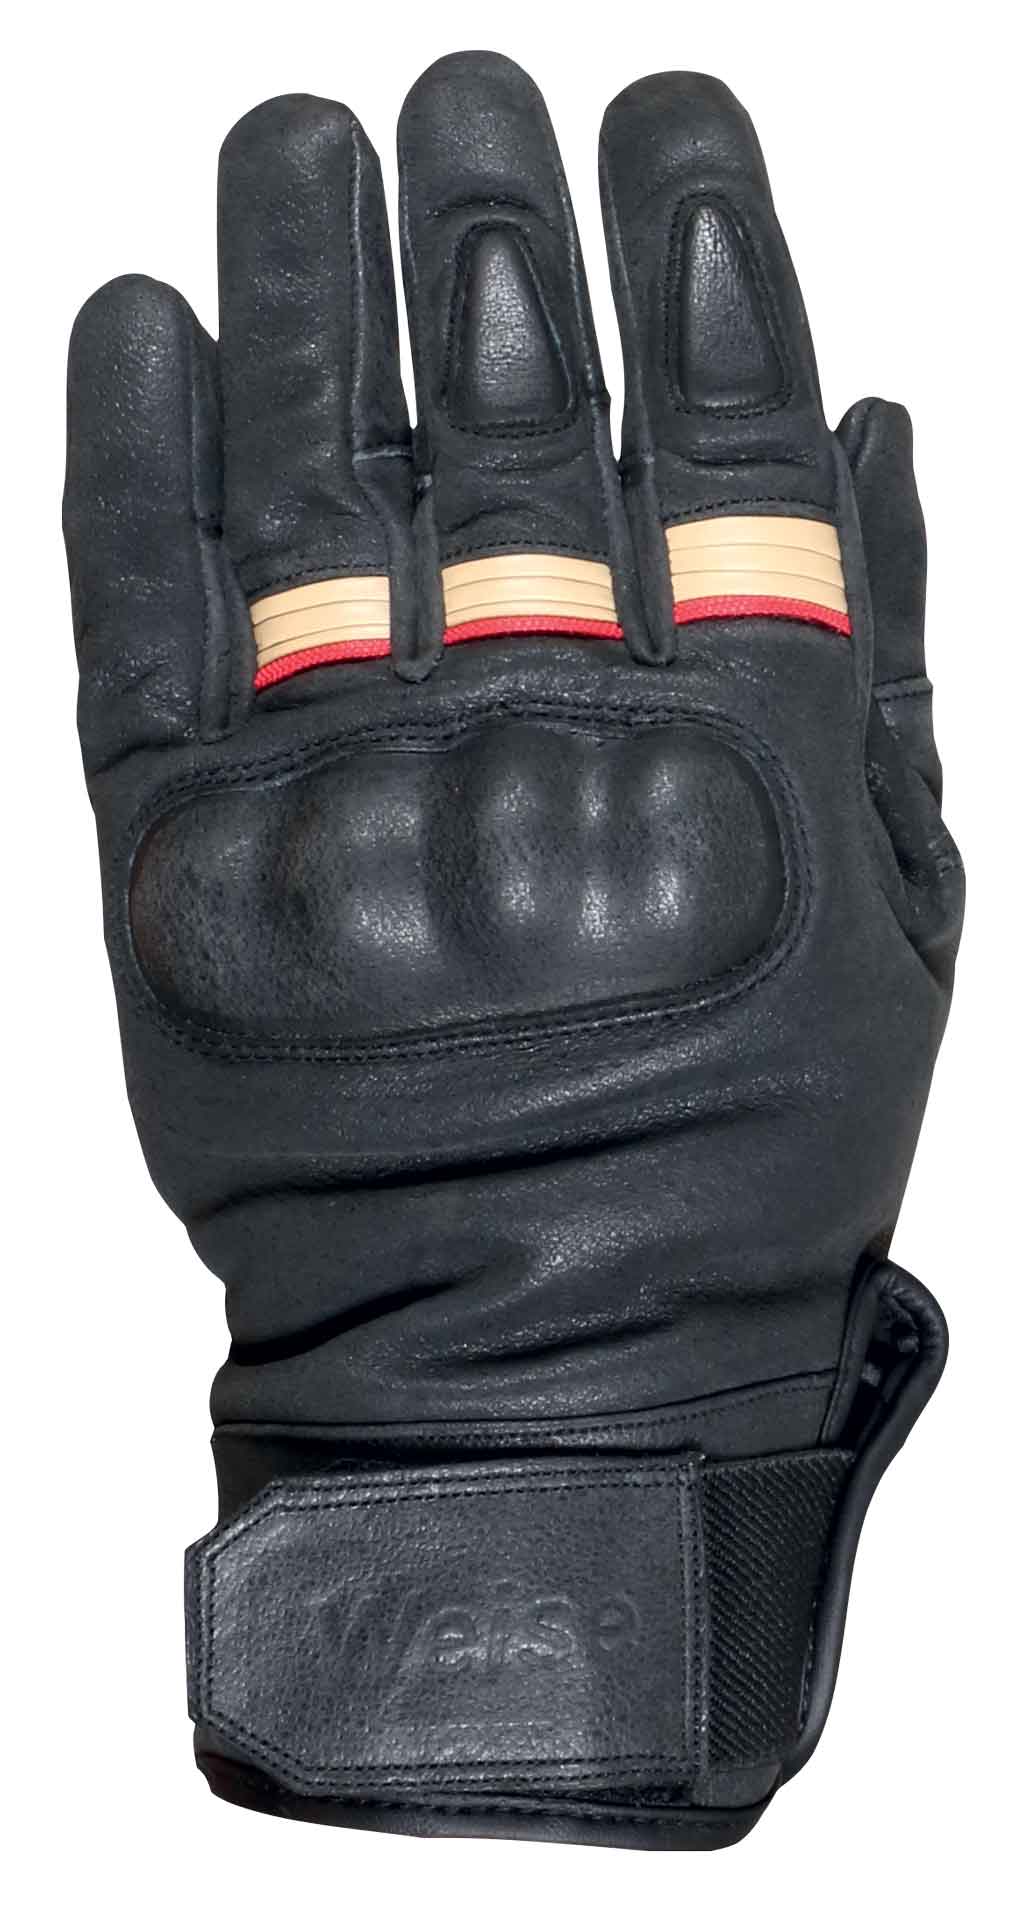 PRODUCT: Weise Detroit motorcycle gloves